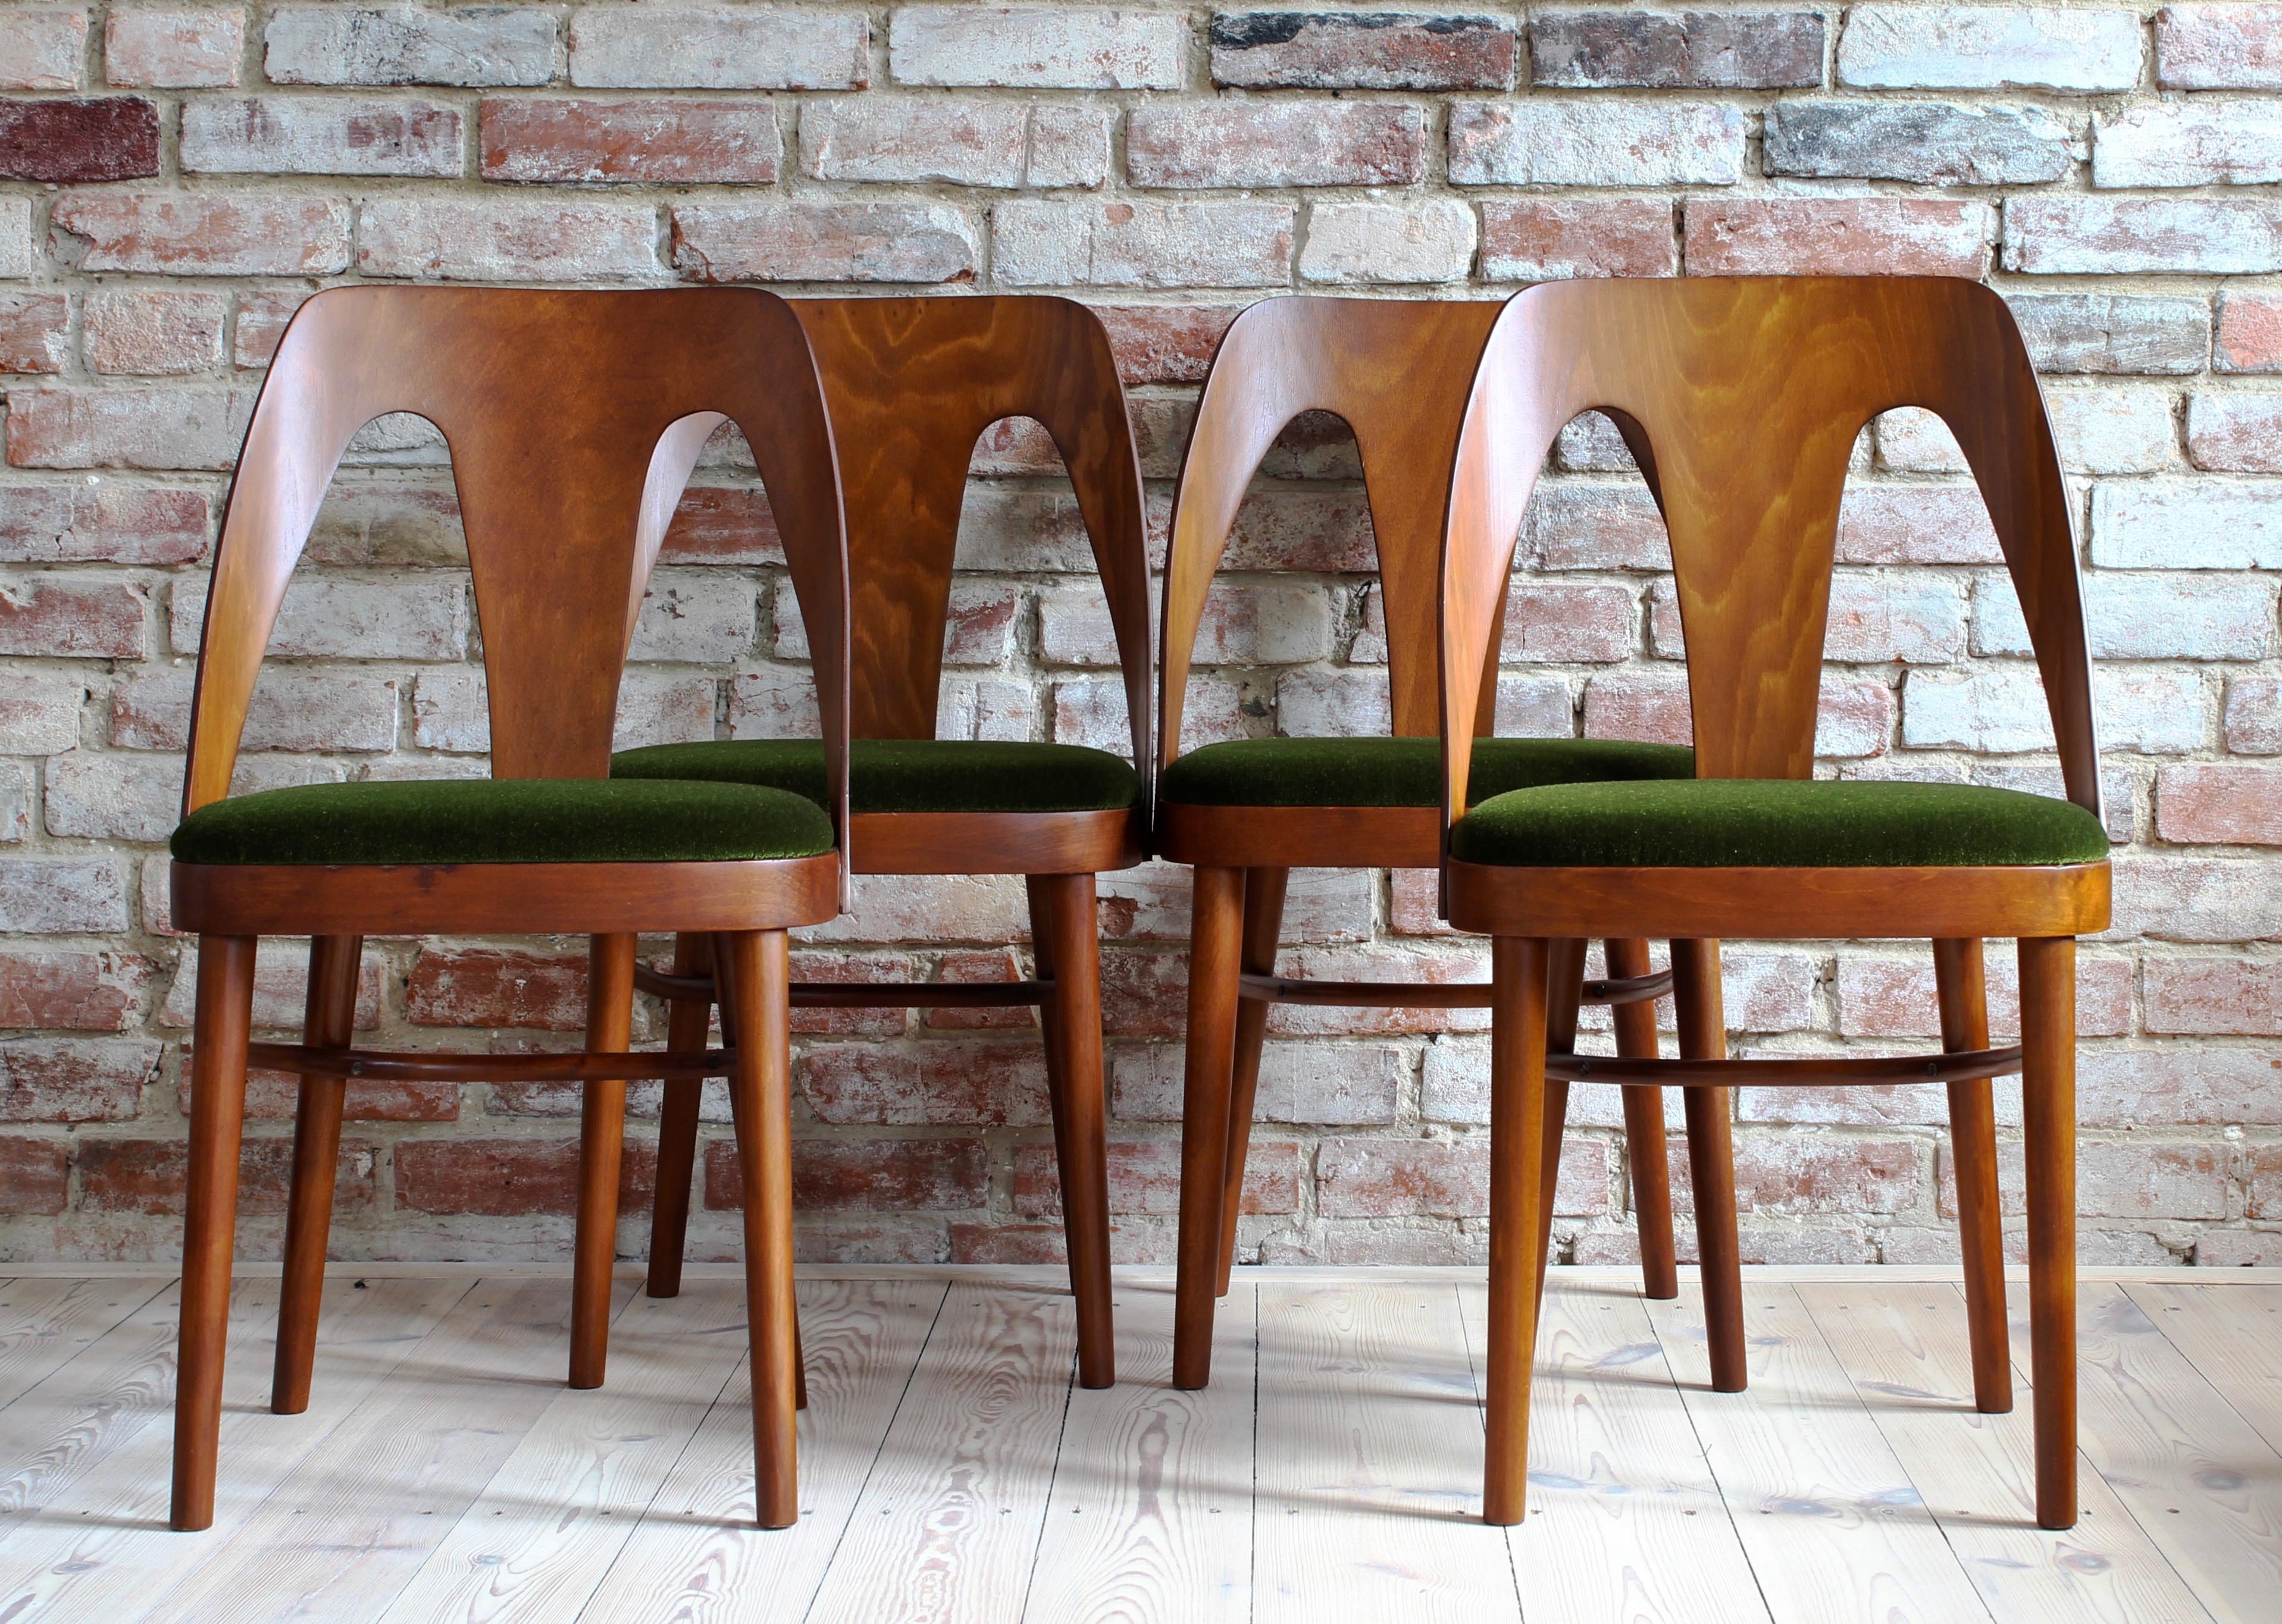 Polish Midcentury Set of 4 Dining Chairs in Juicy Green Mohair by Kvadrat